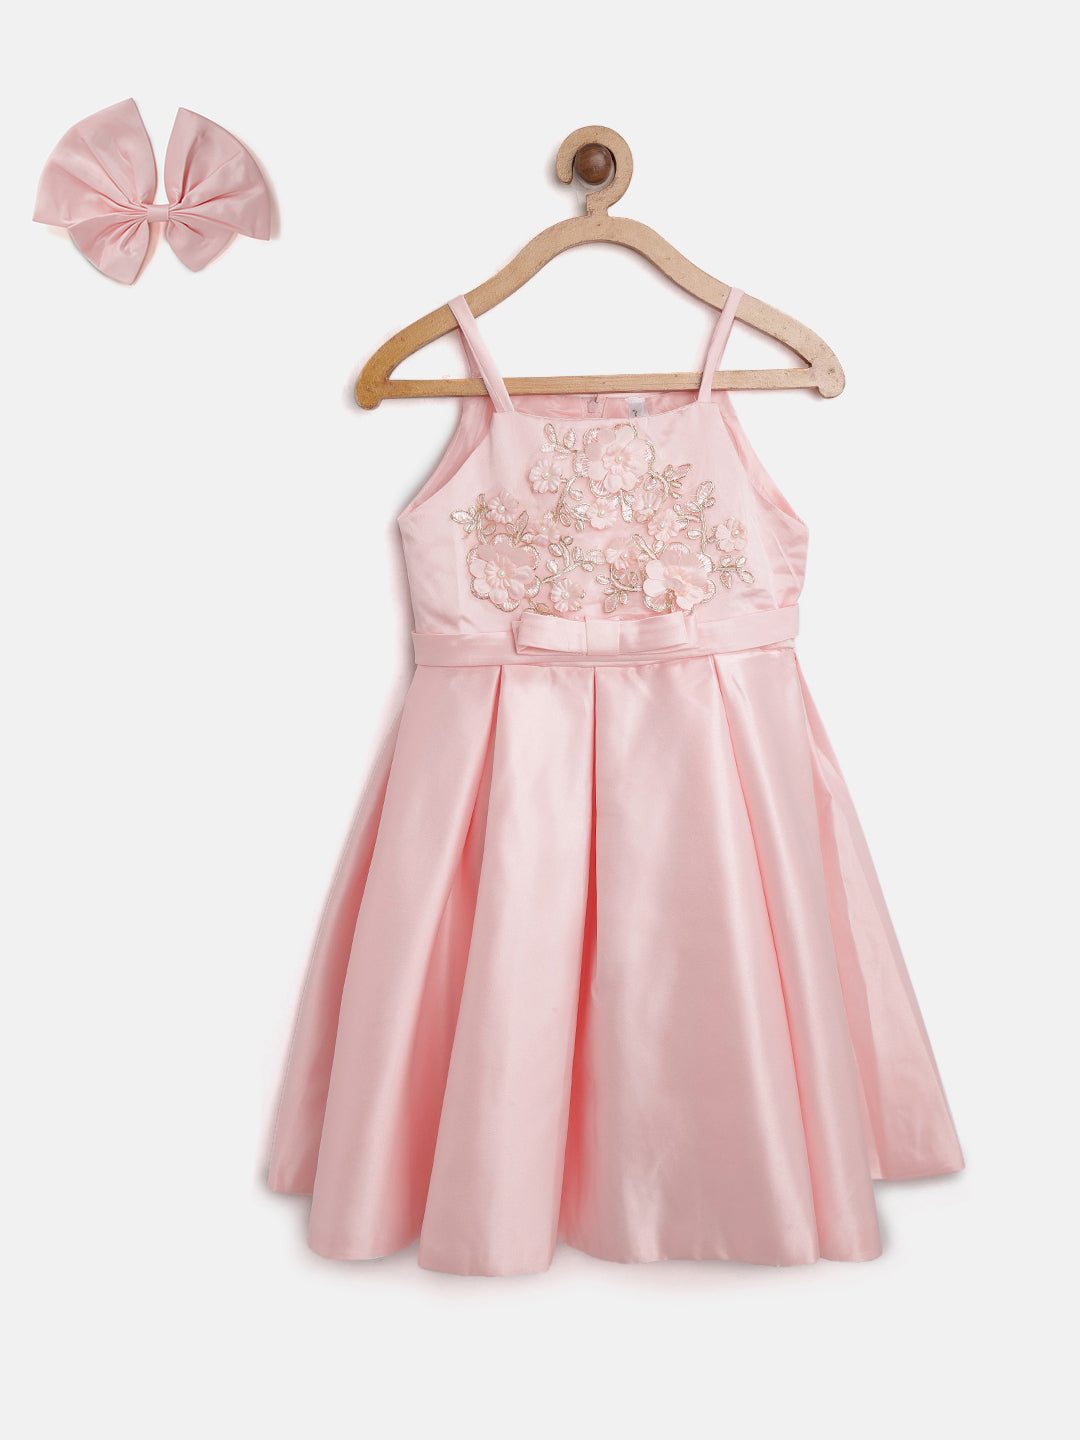 Gilr's Cream Flowers And Pearls Embellished Party Dress - StyleStone Kid